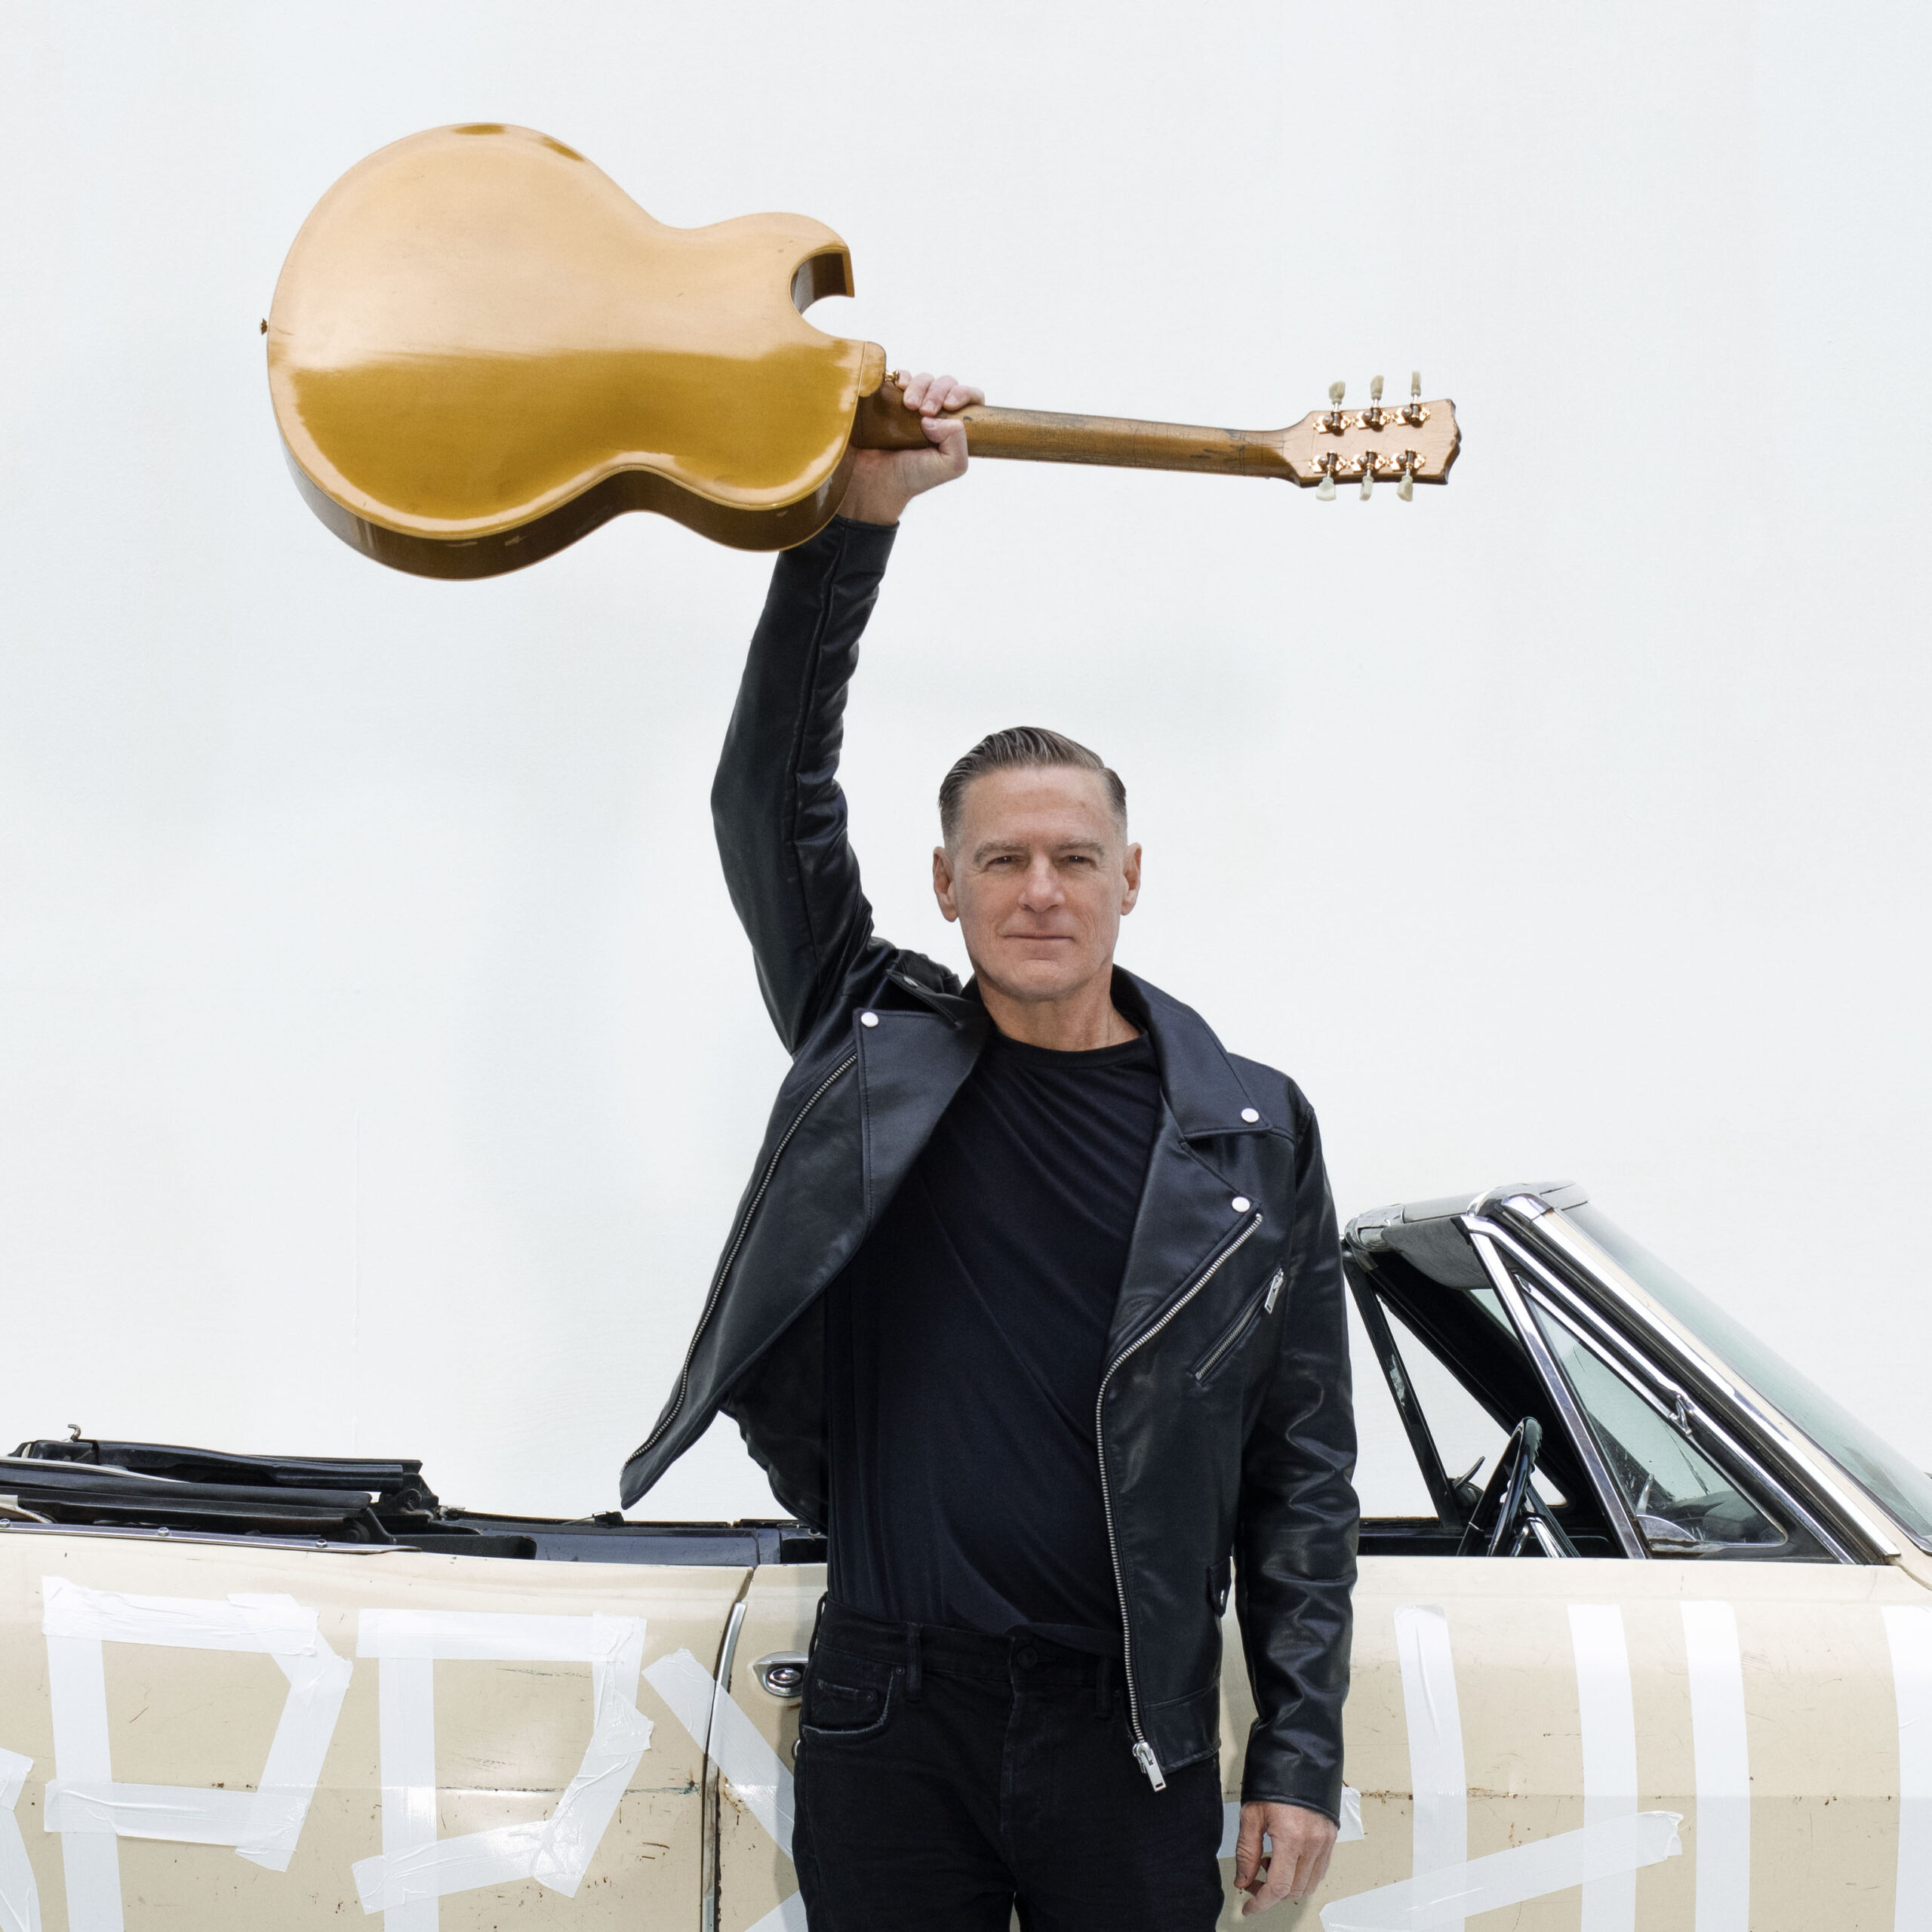 Bryan Adams announces UK arena tour dates for 2022: how to get